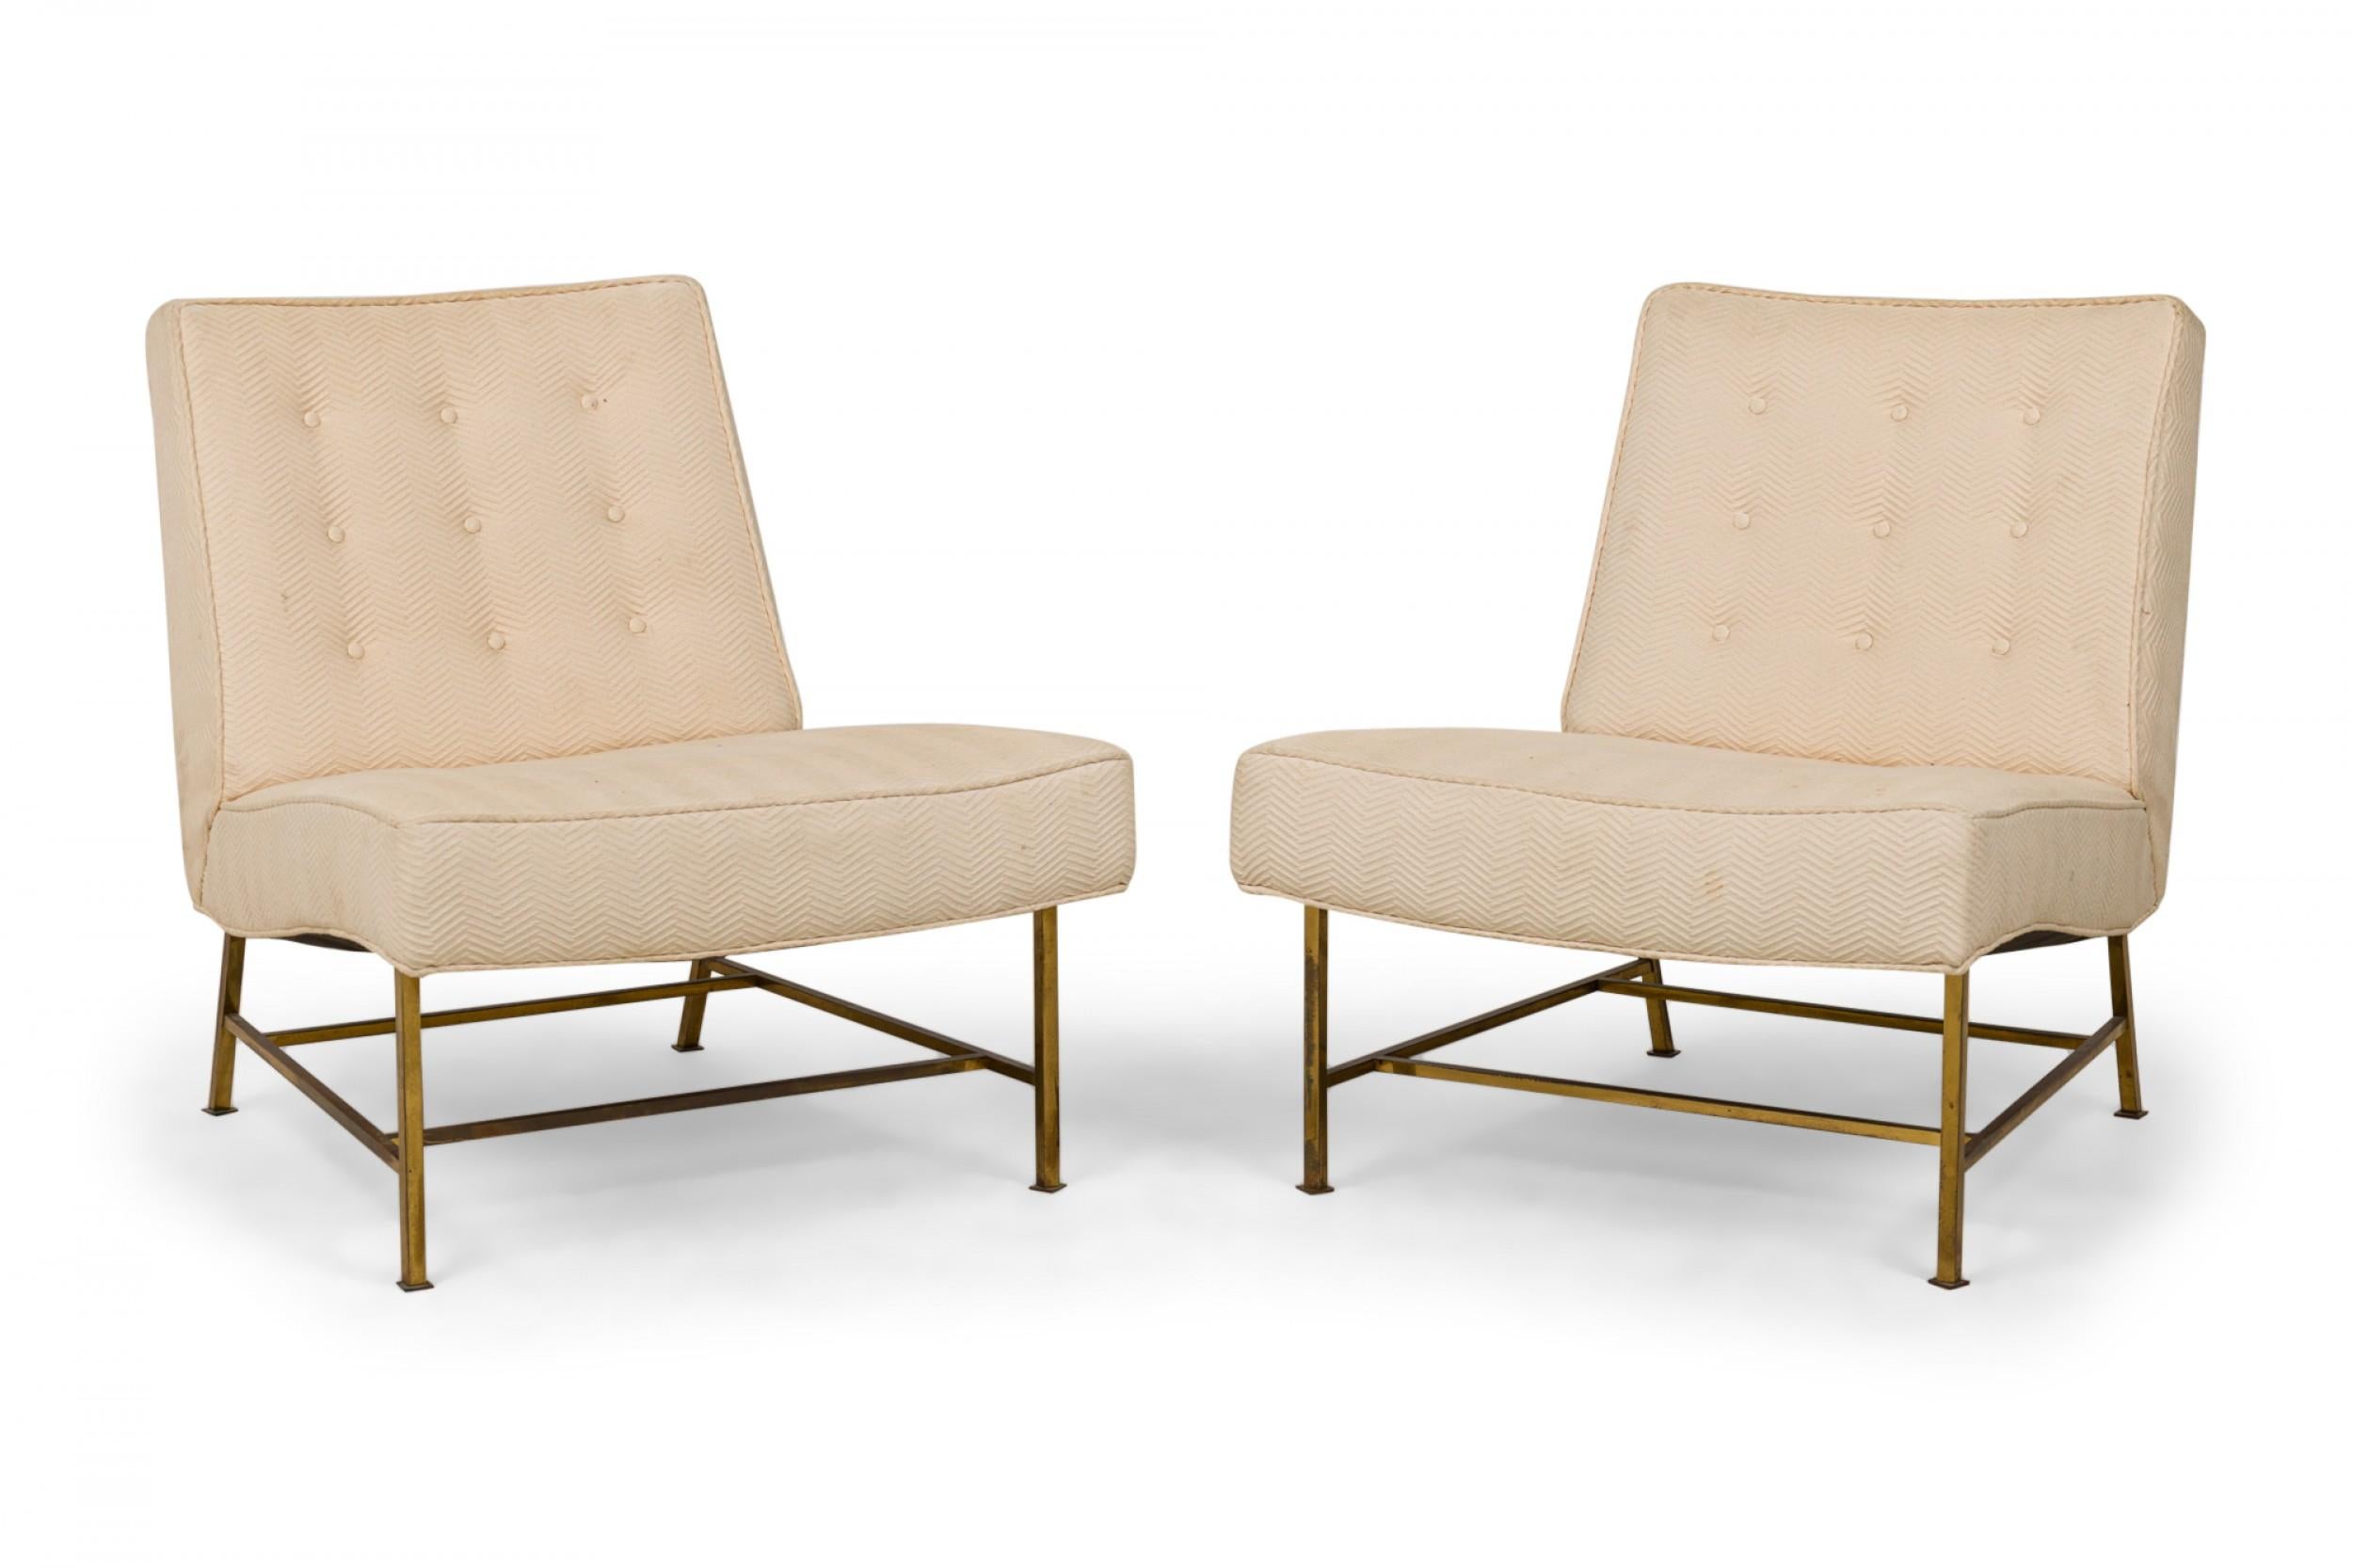 Pair of Harvey Probber Beige Zig-Zag Textured Upholstery and Brass Slipper Chair